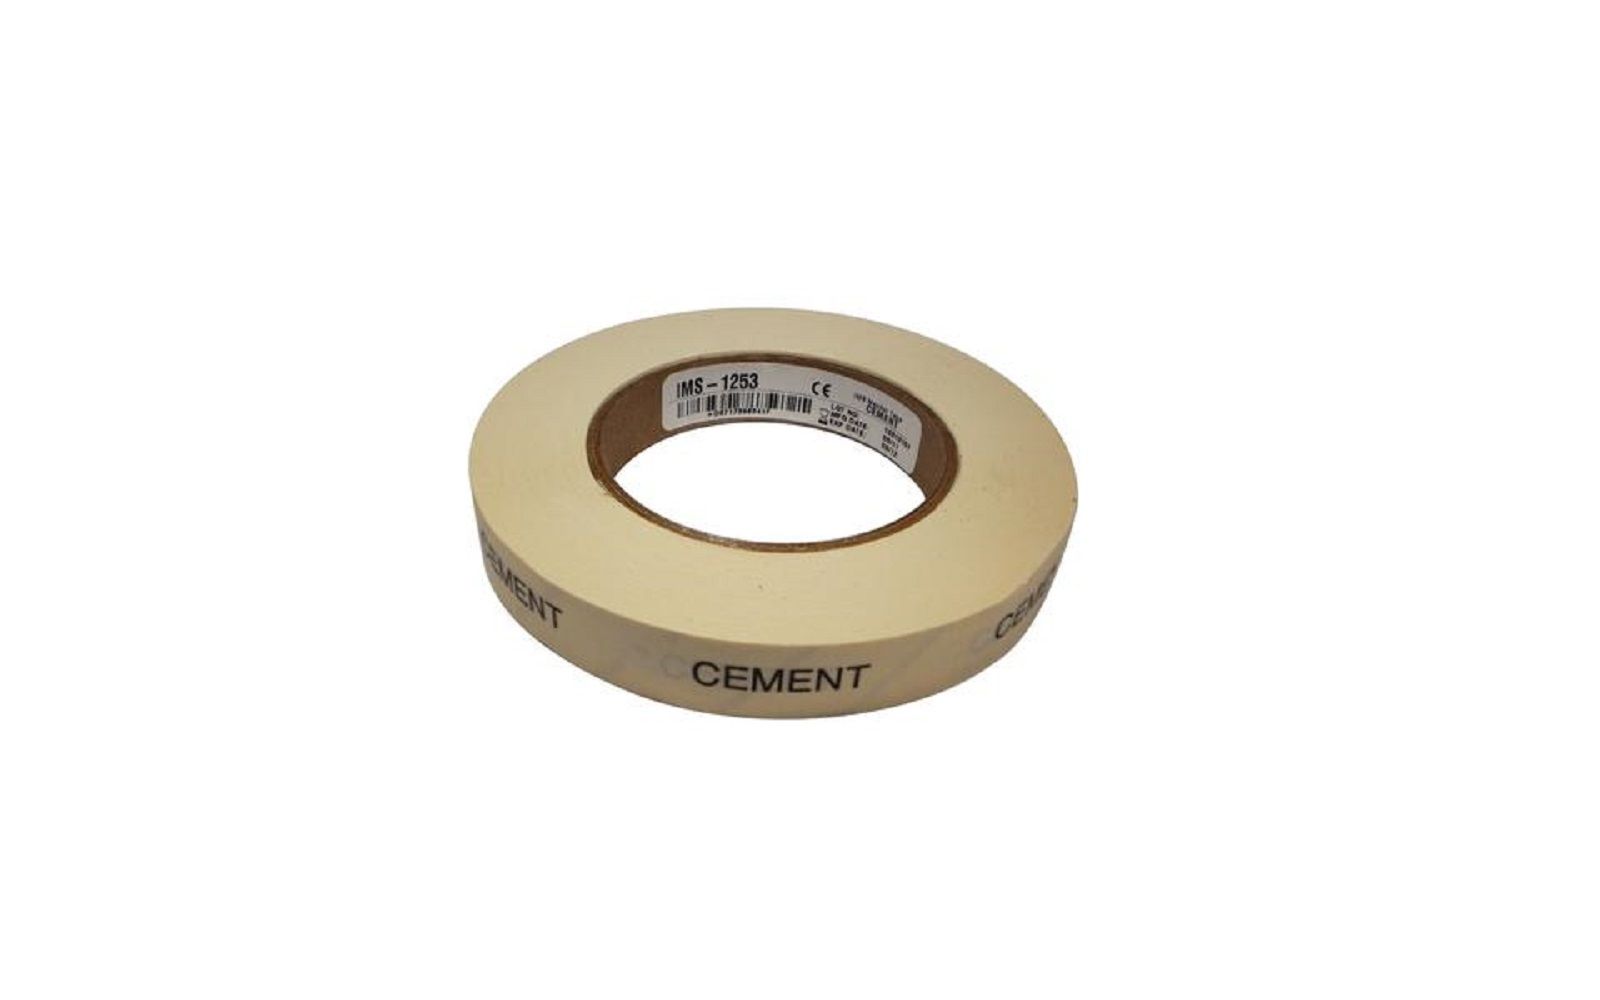 Ims monitor tape – procedure coded 60 yards, 3/4" - cement